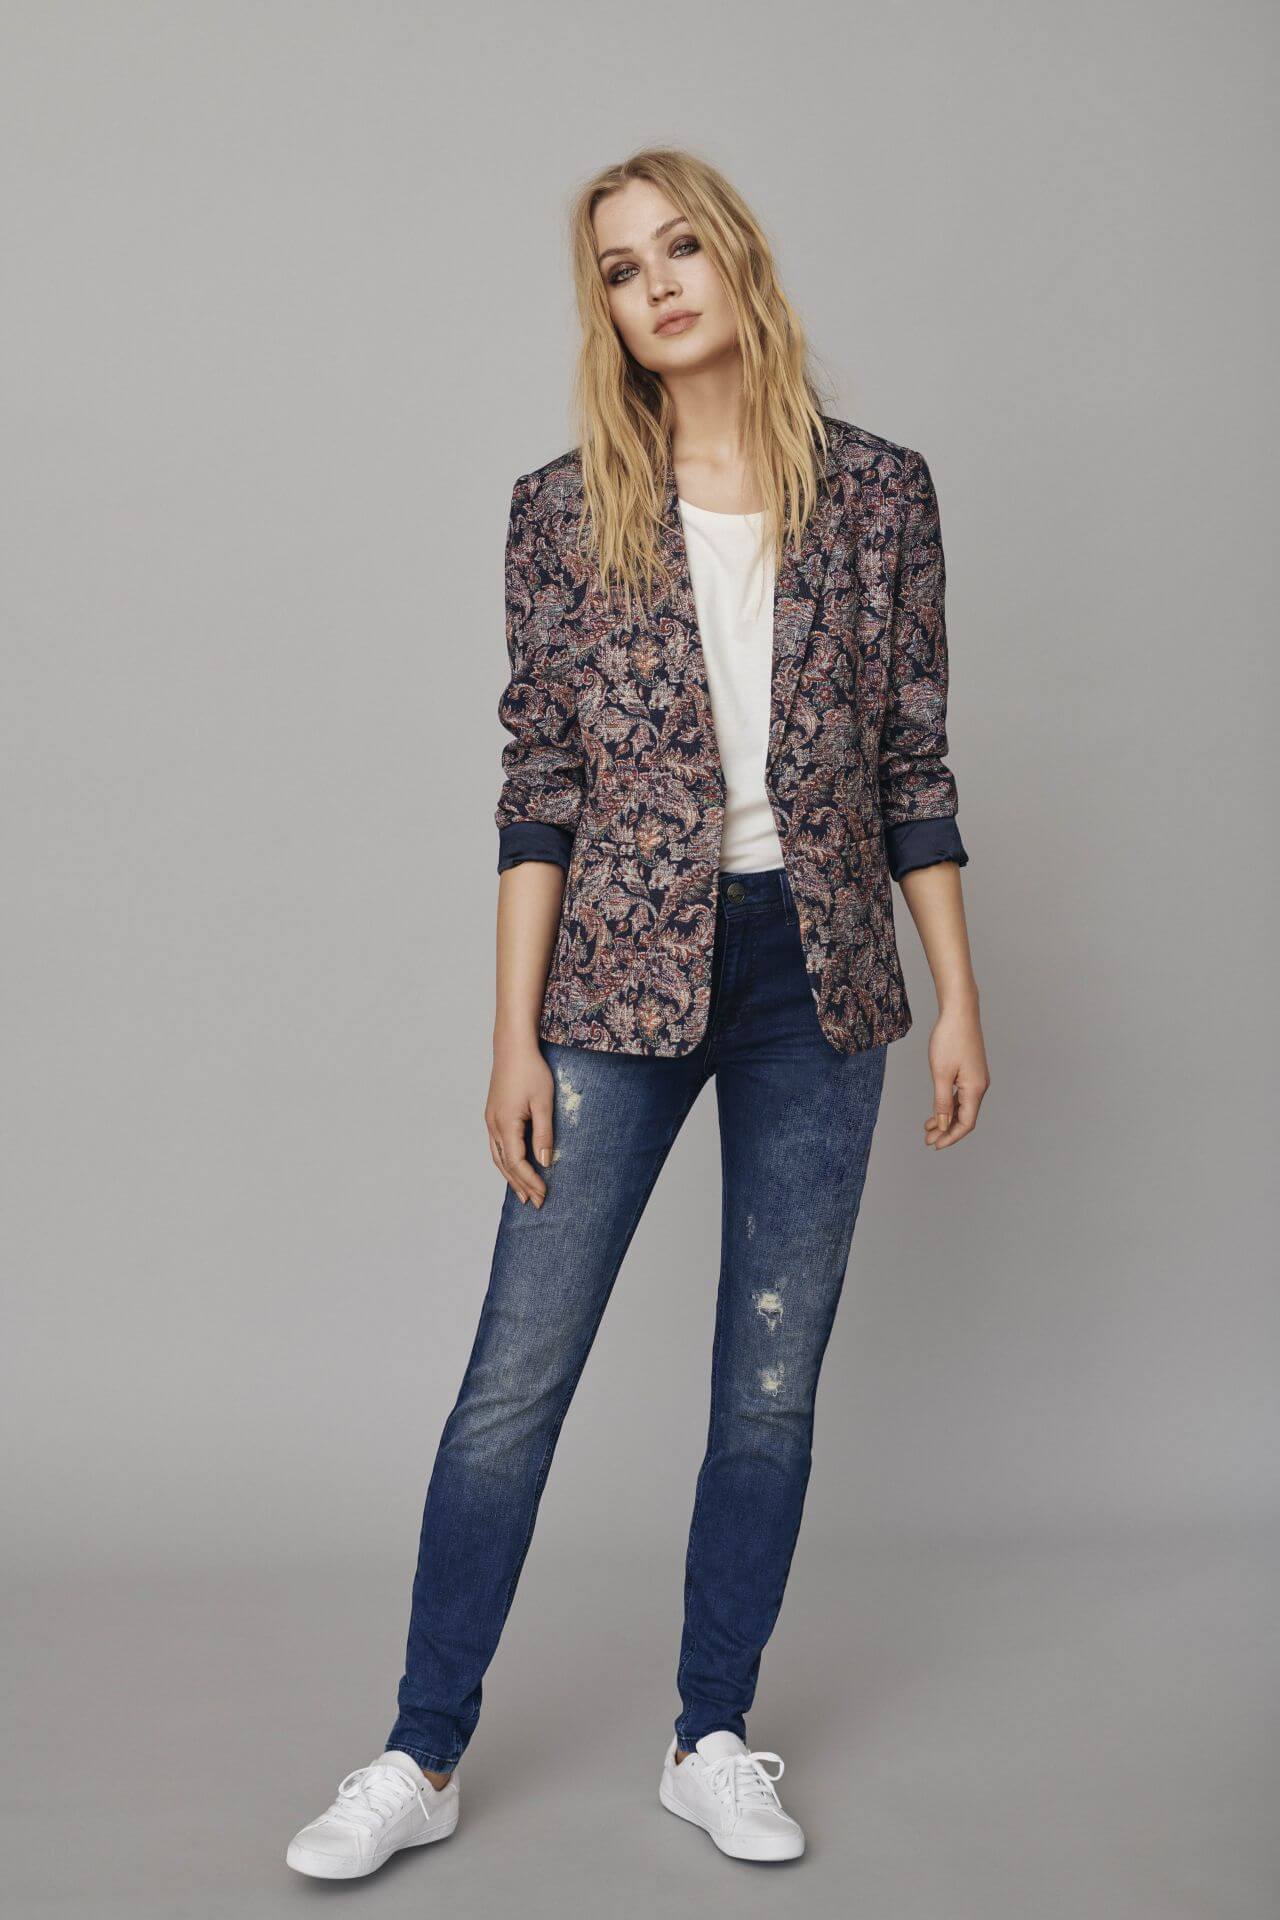 Camilla Forchhammer Christensen In Printed Jacket Under White Top With Blue Denim Jeans Outfit